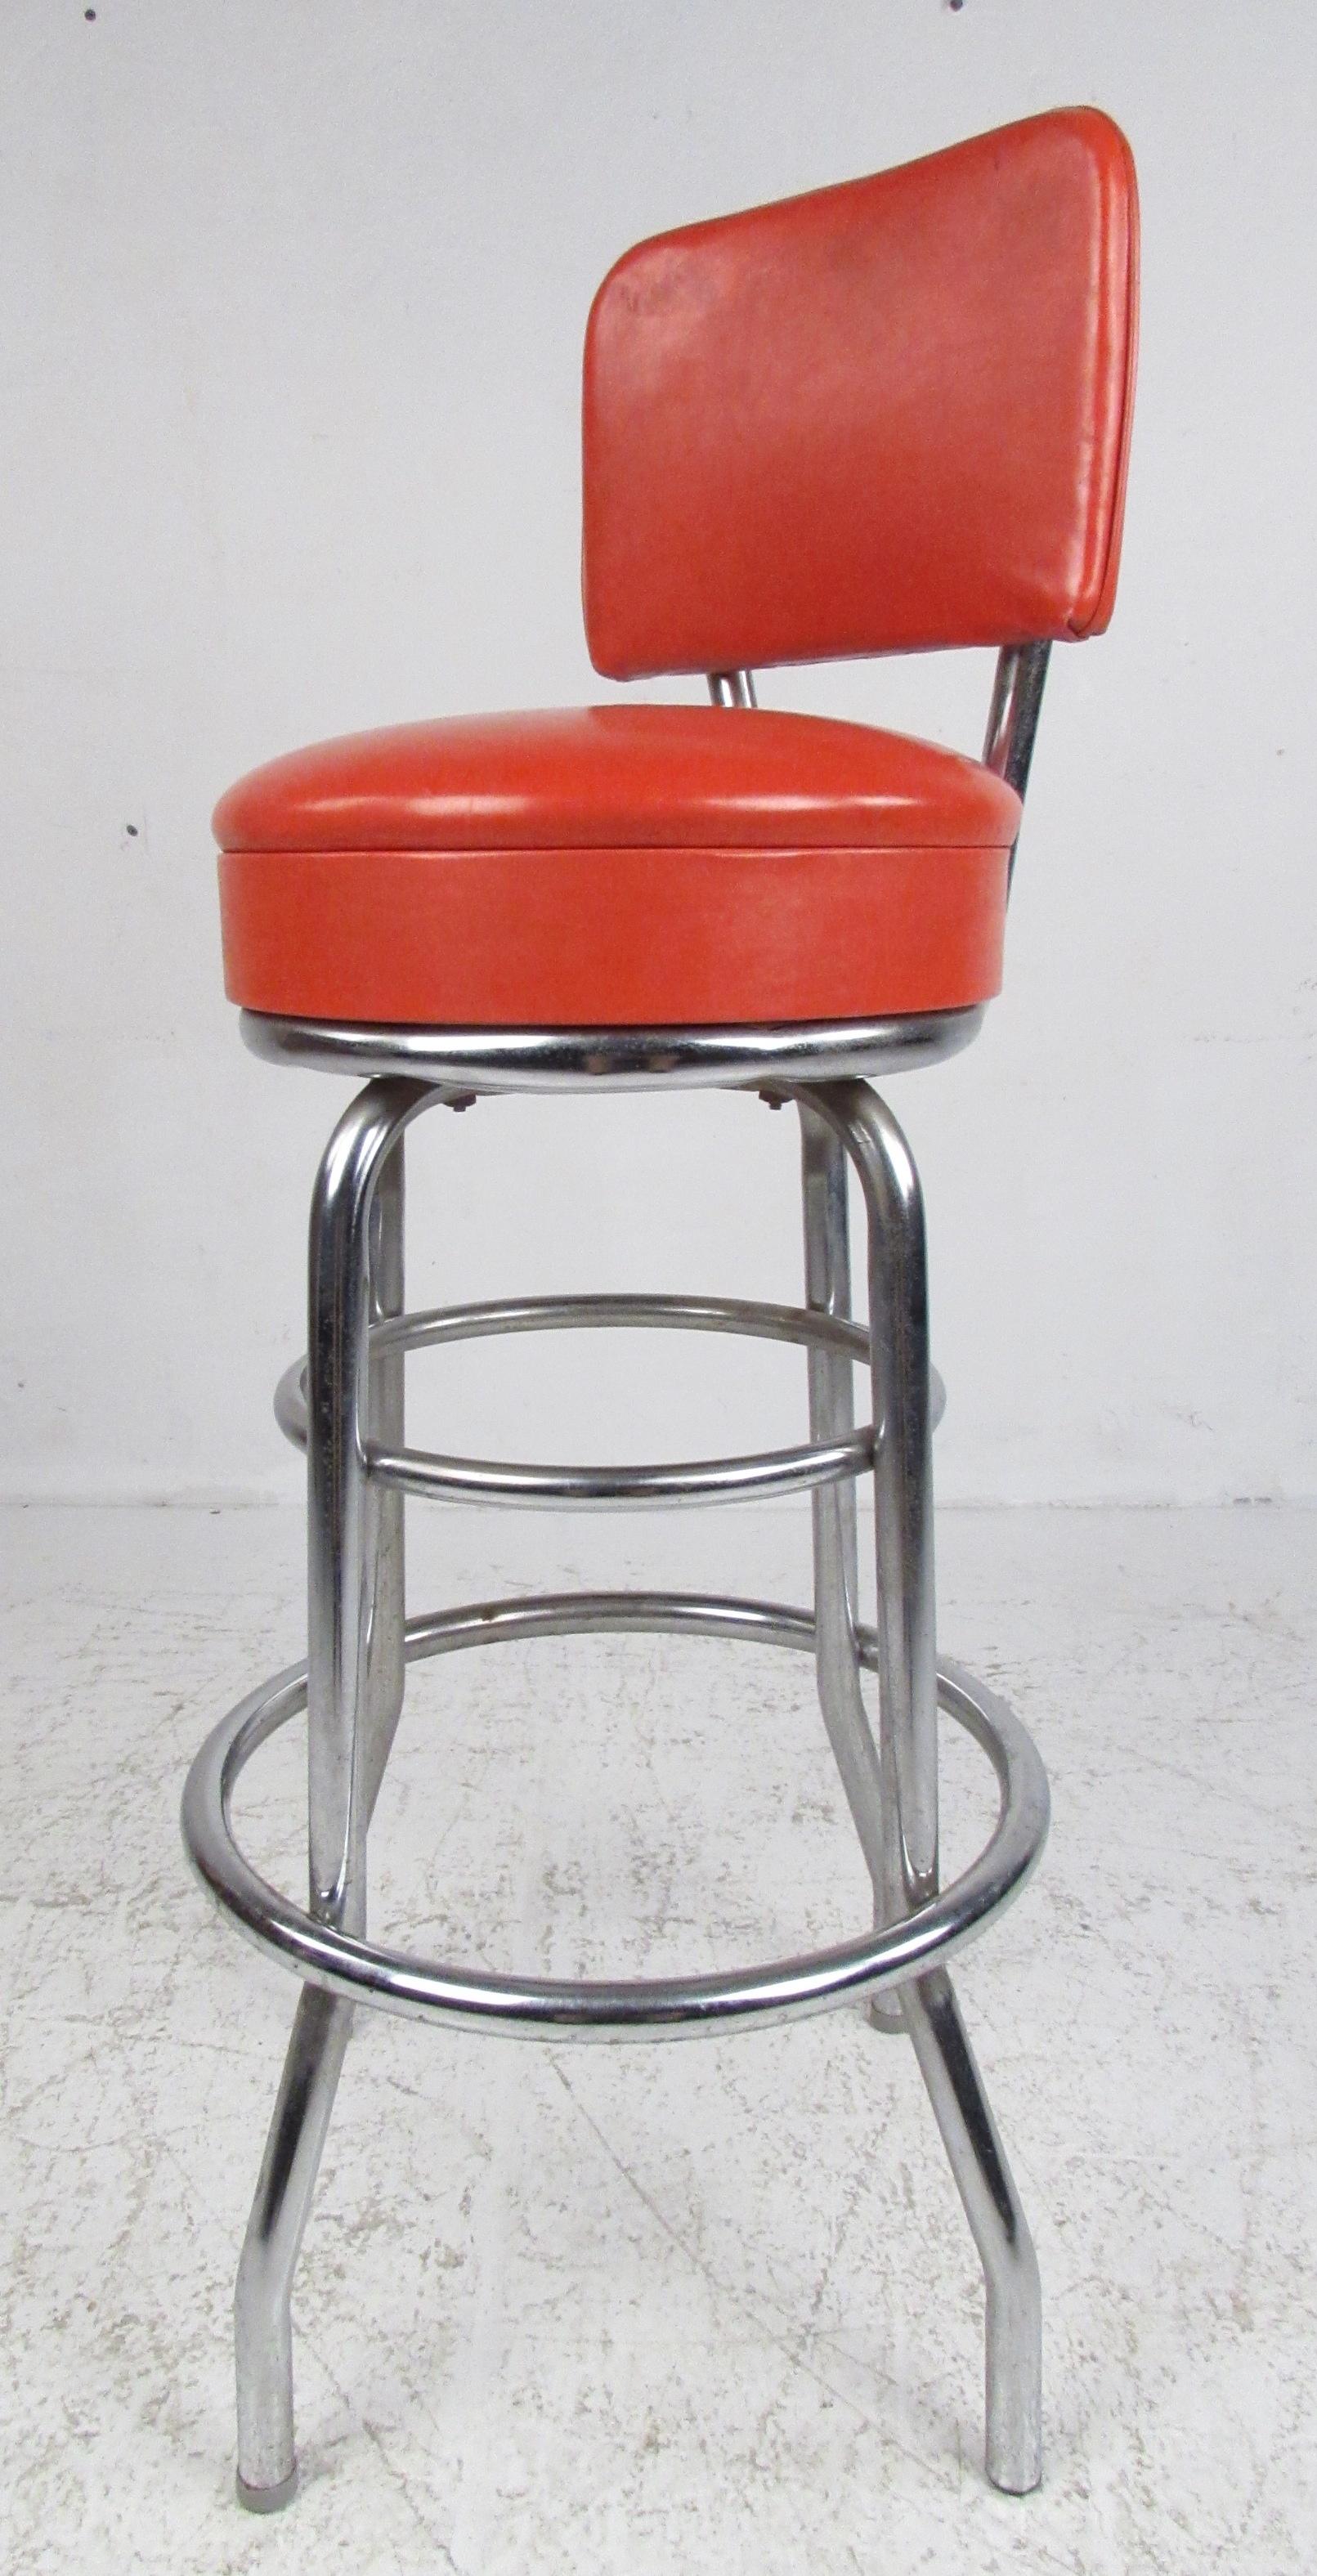 Set of four Mid-Century Modern swivel bar stools by Moreland Dalton Corp., 1969. Very comfortable thick padded seats with wide backrests and splayed legs providing a wide footprint and stabile base. Please confirm item location (NY or NJ) with